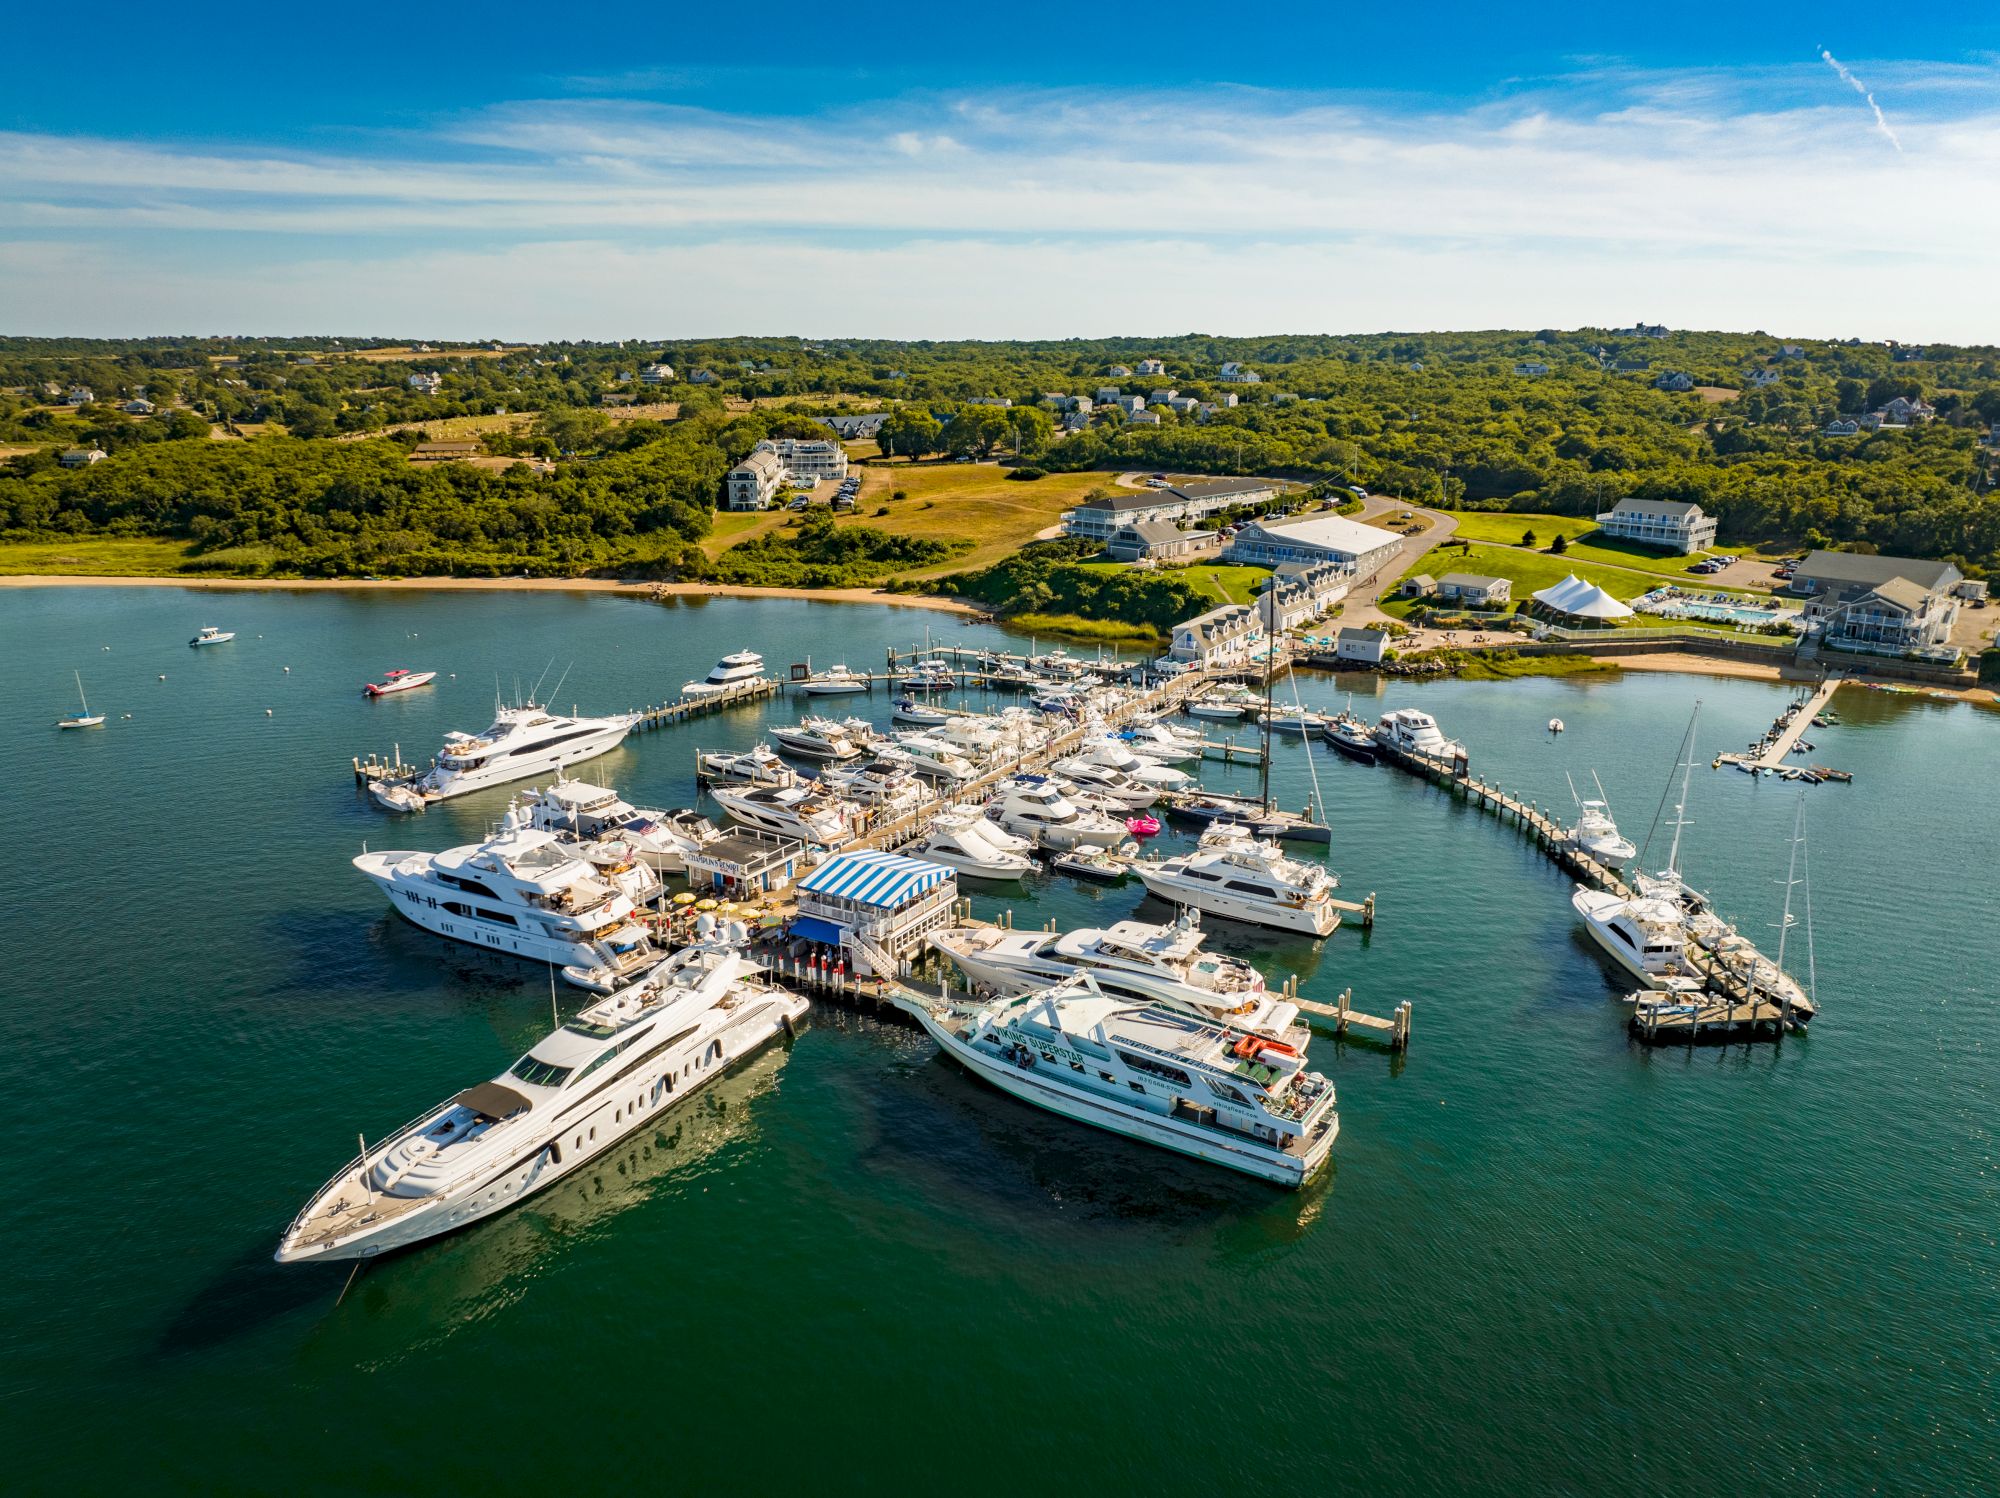 A marina filled with various boats and yachts is visible, with a small town and green landscape in the background under a clear blue sky.